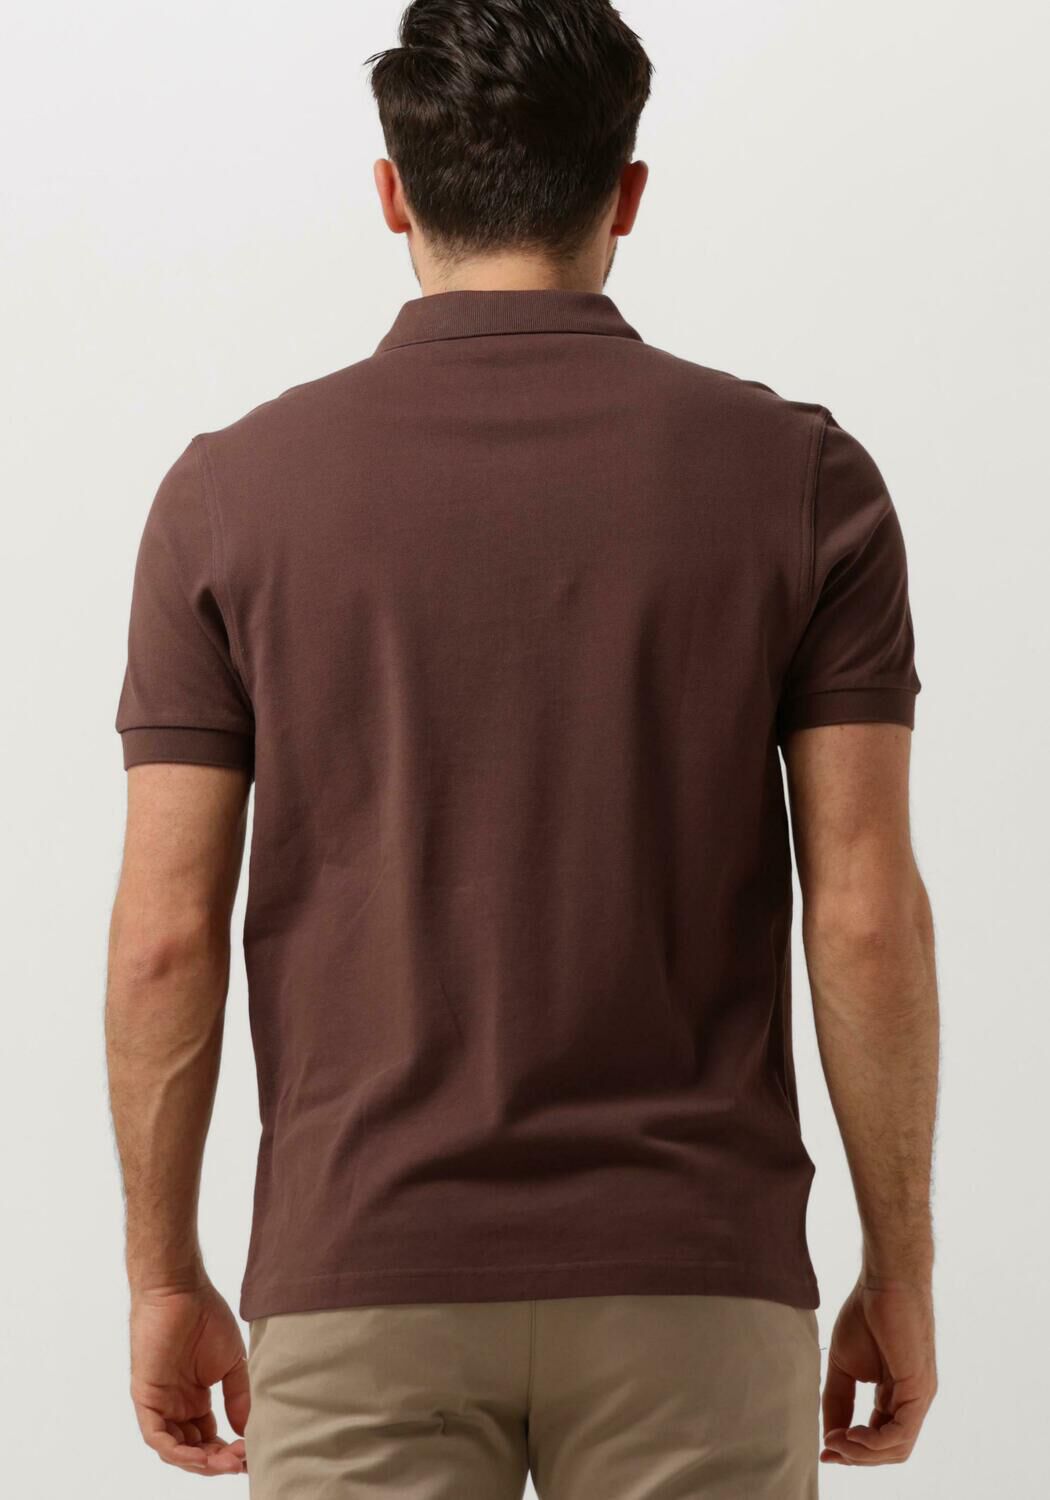 FRED PERRY Heren Polo's & T-shirts The Plain Shirt Brique